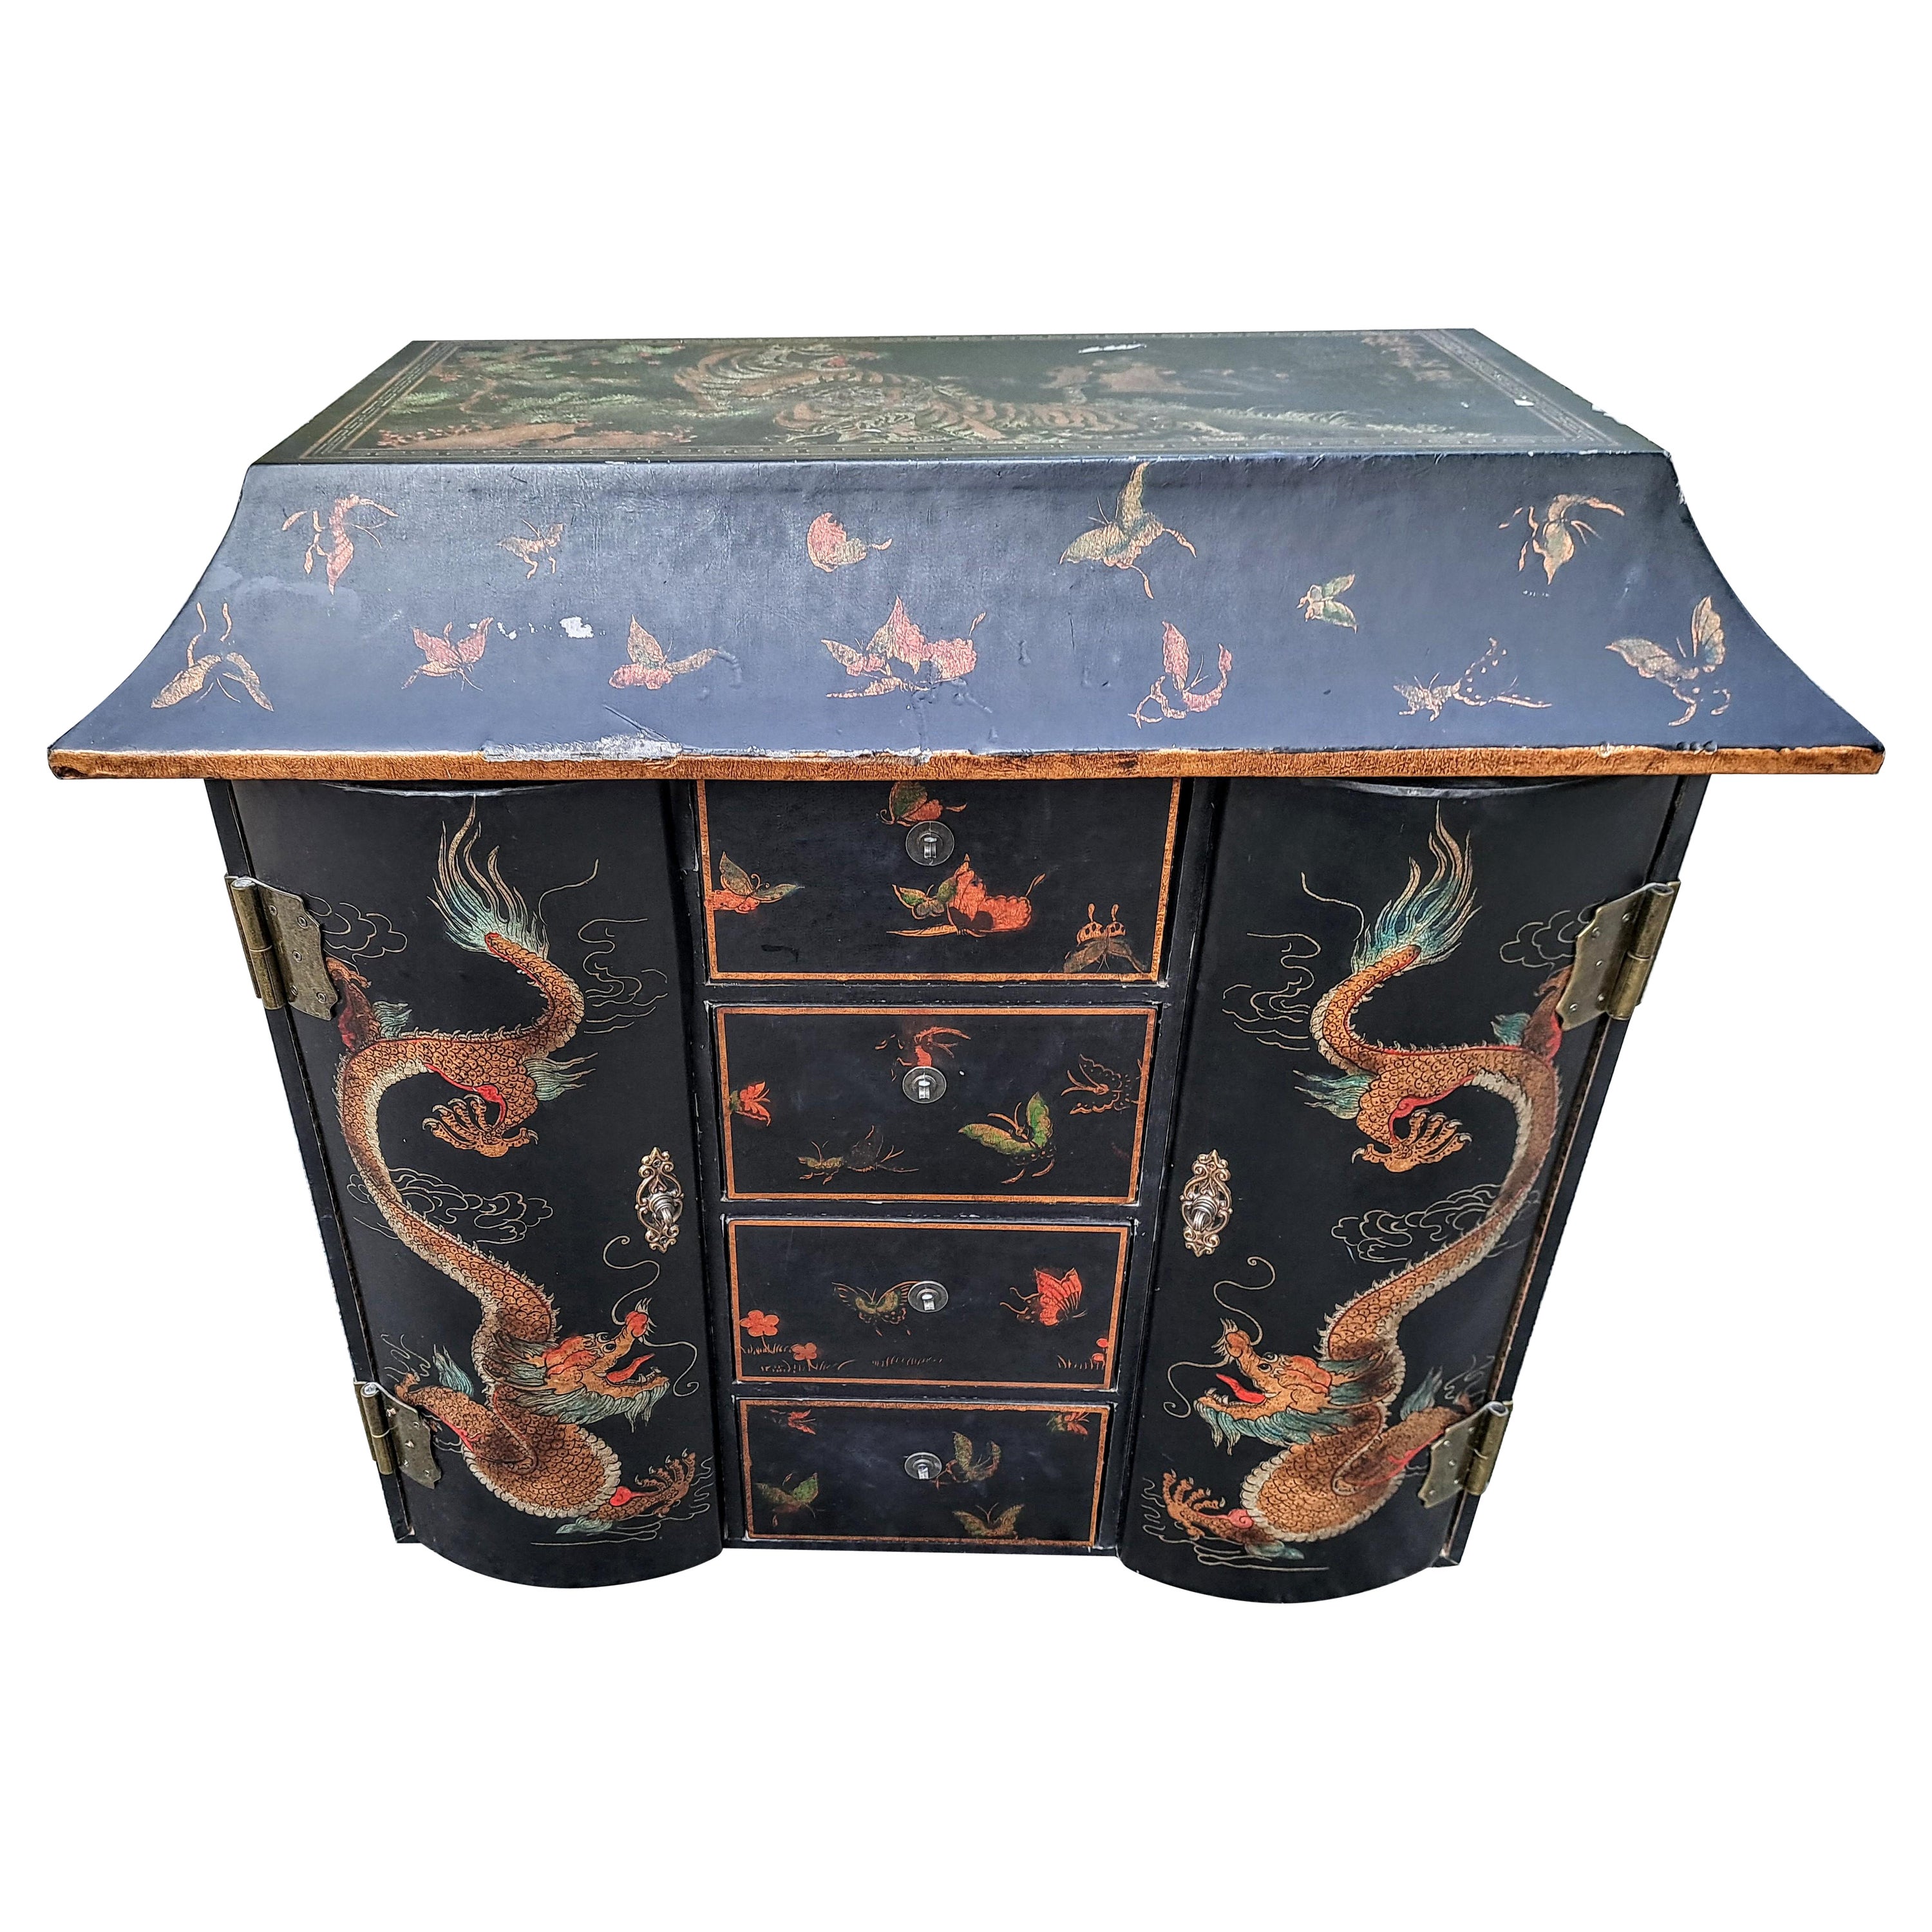 Antique Asian Chinoiserie  Pagoda Shaped Tea / Apothecary Cabinet  For Sale